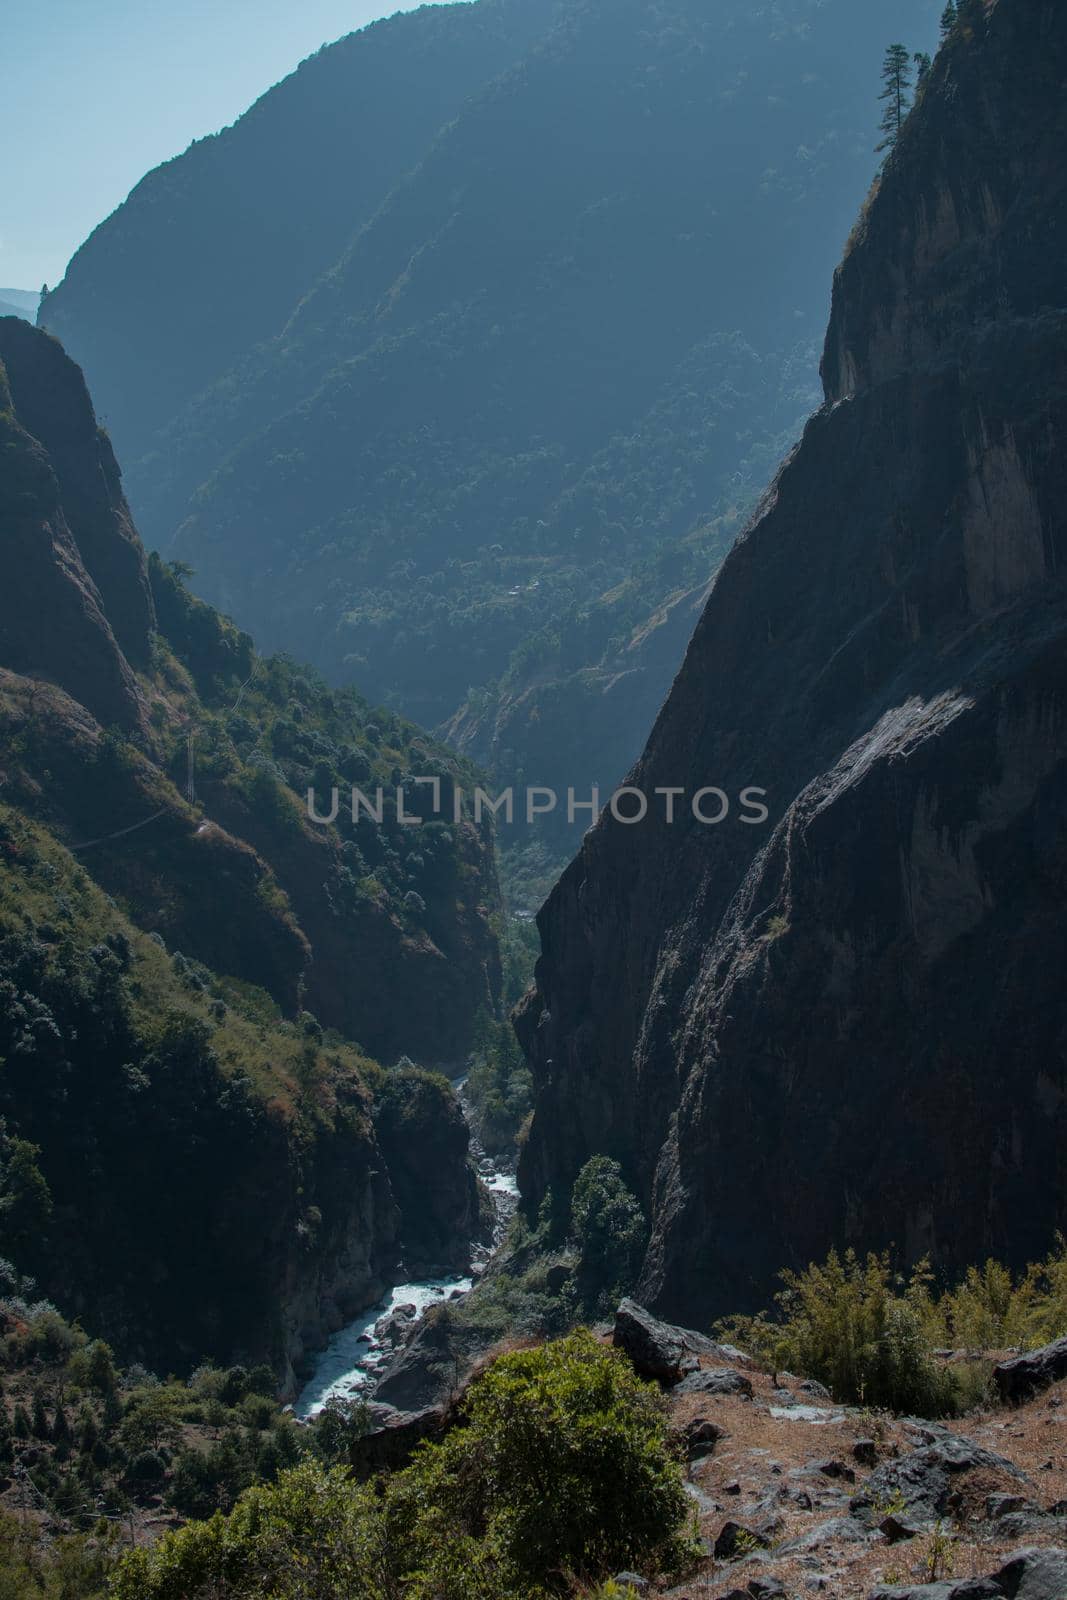 Marshyangdi river flowing through the gorge valley, Lamjung district, Annapurna circuit, Nepal